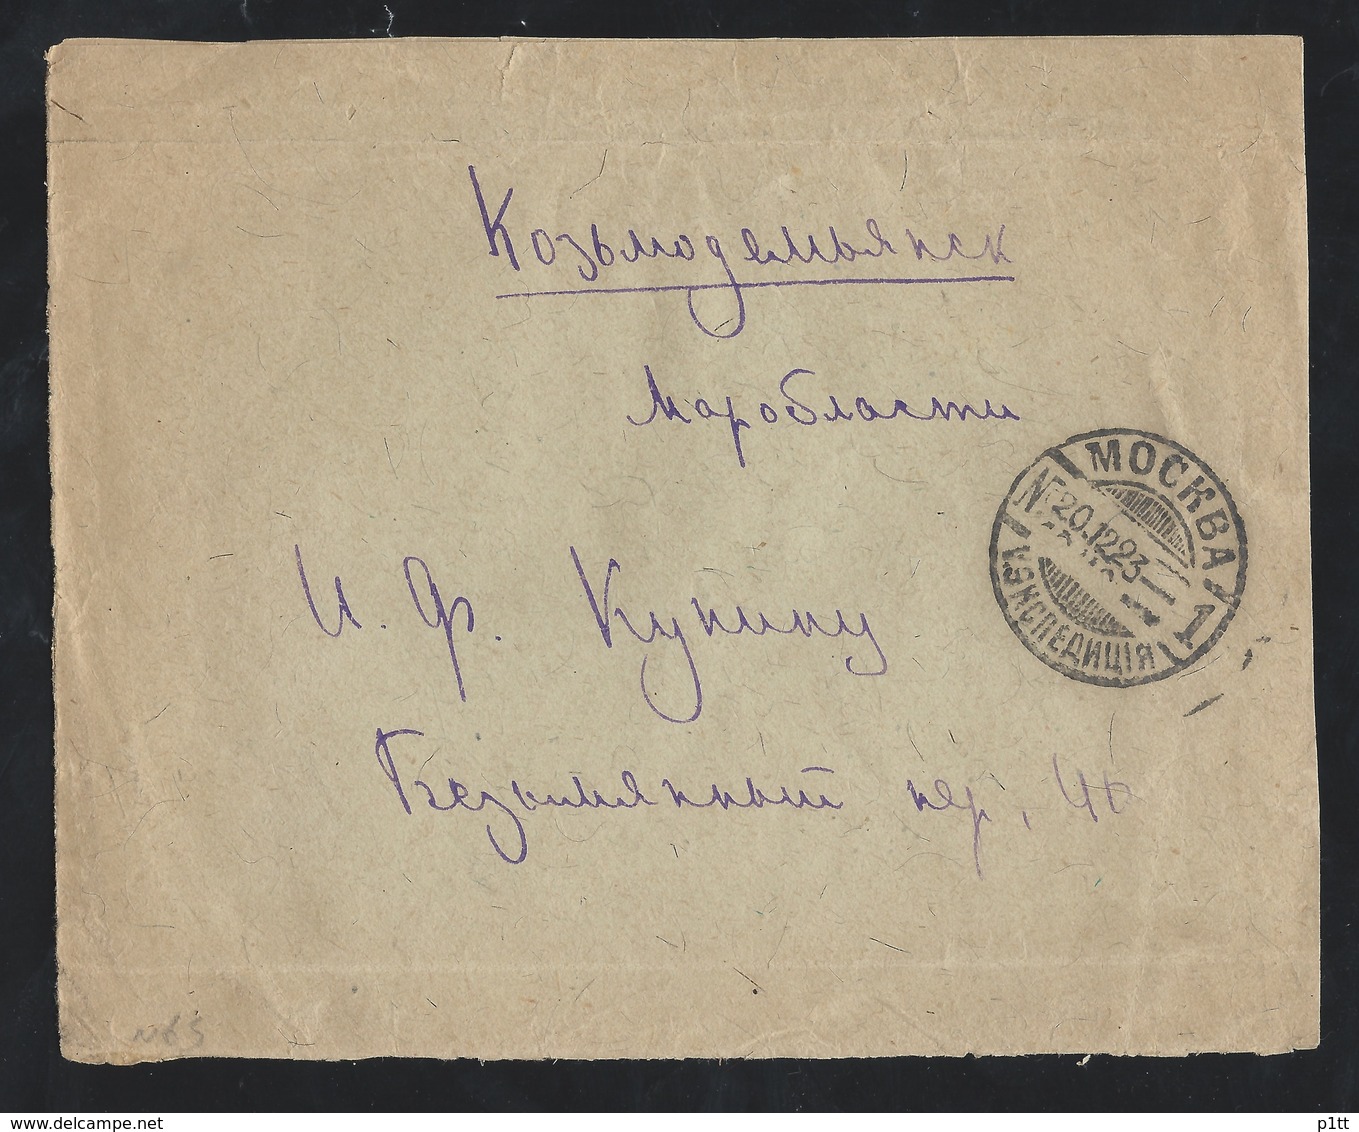 598d.Intercity Simple Closed Letter. Passed Post 1923 Moscow Kozmodemyansk. "Gold Standard". Old Stamp Ъ. - Covers & Documents